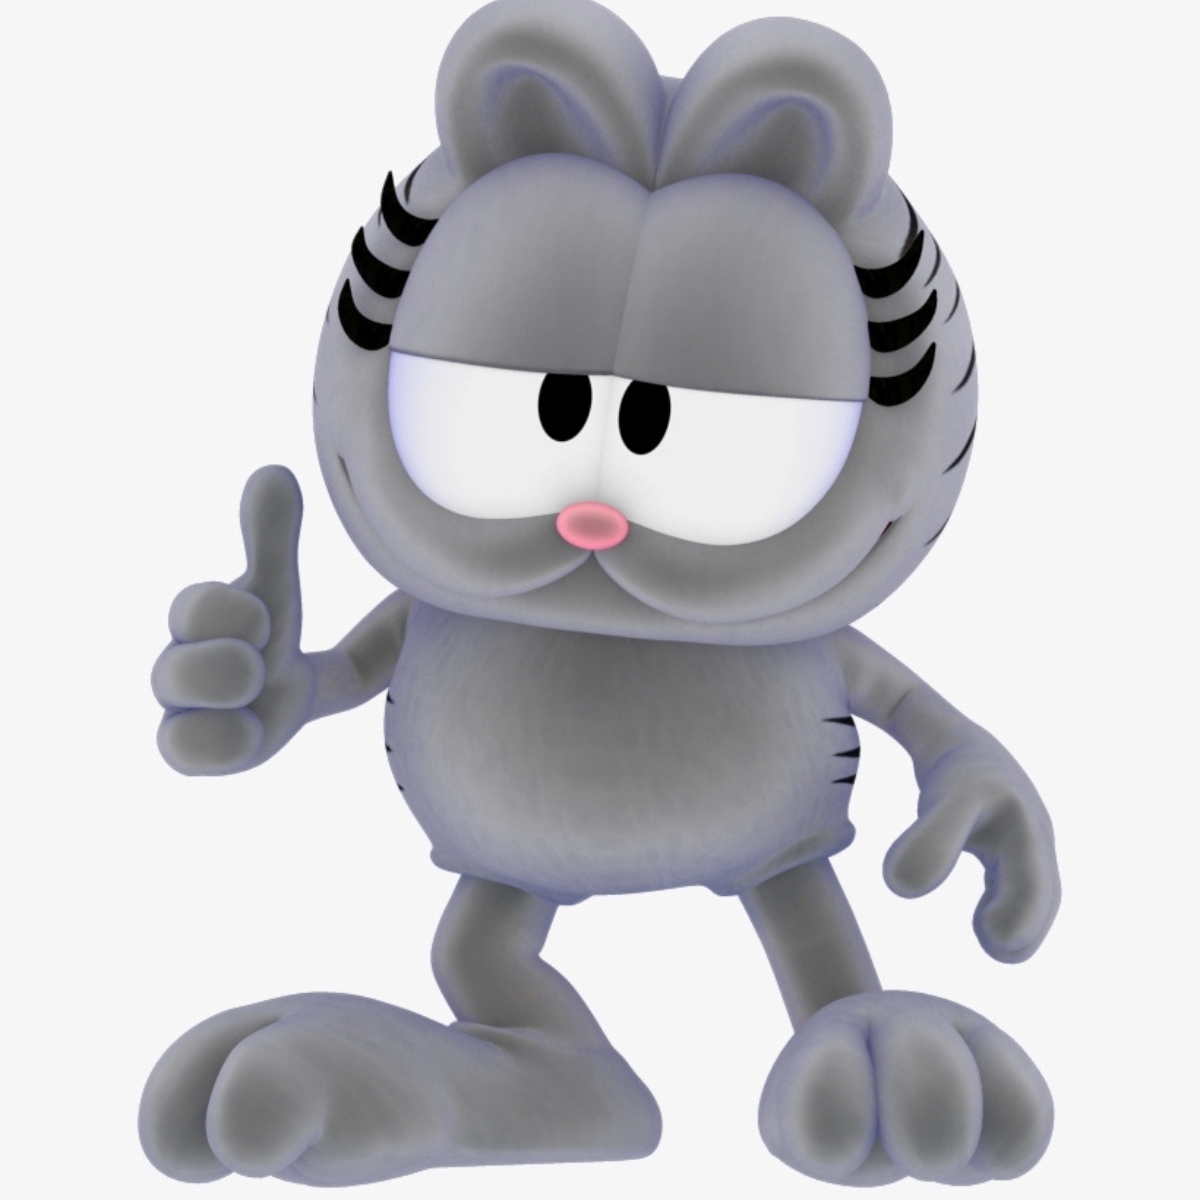 24 Facts About Nermal (Garfield And Friends) - Facts.net